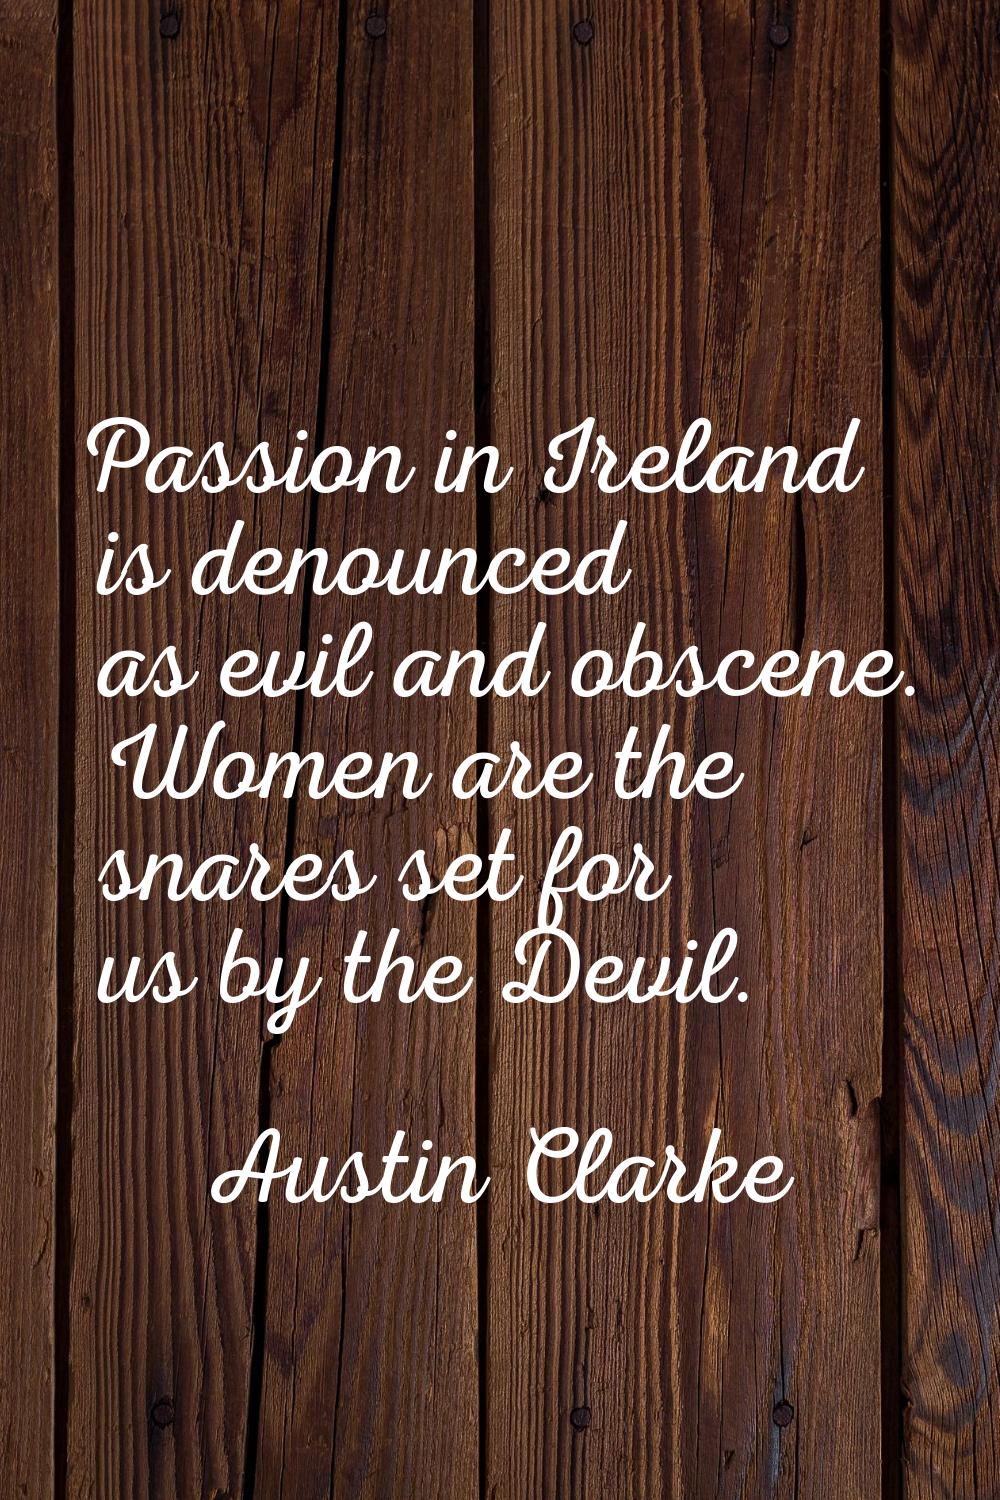 Passion in Ireland is denounced as evil and obscene. Women are the snares set for us by the Devil.